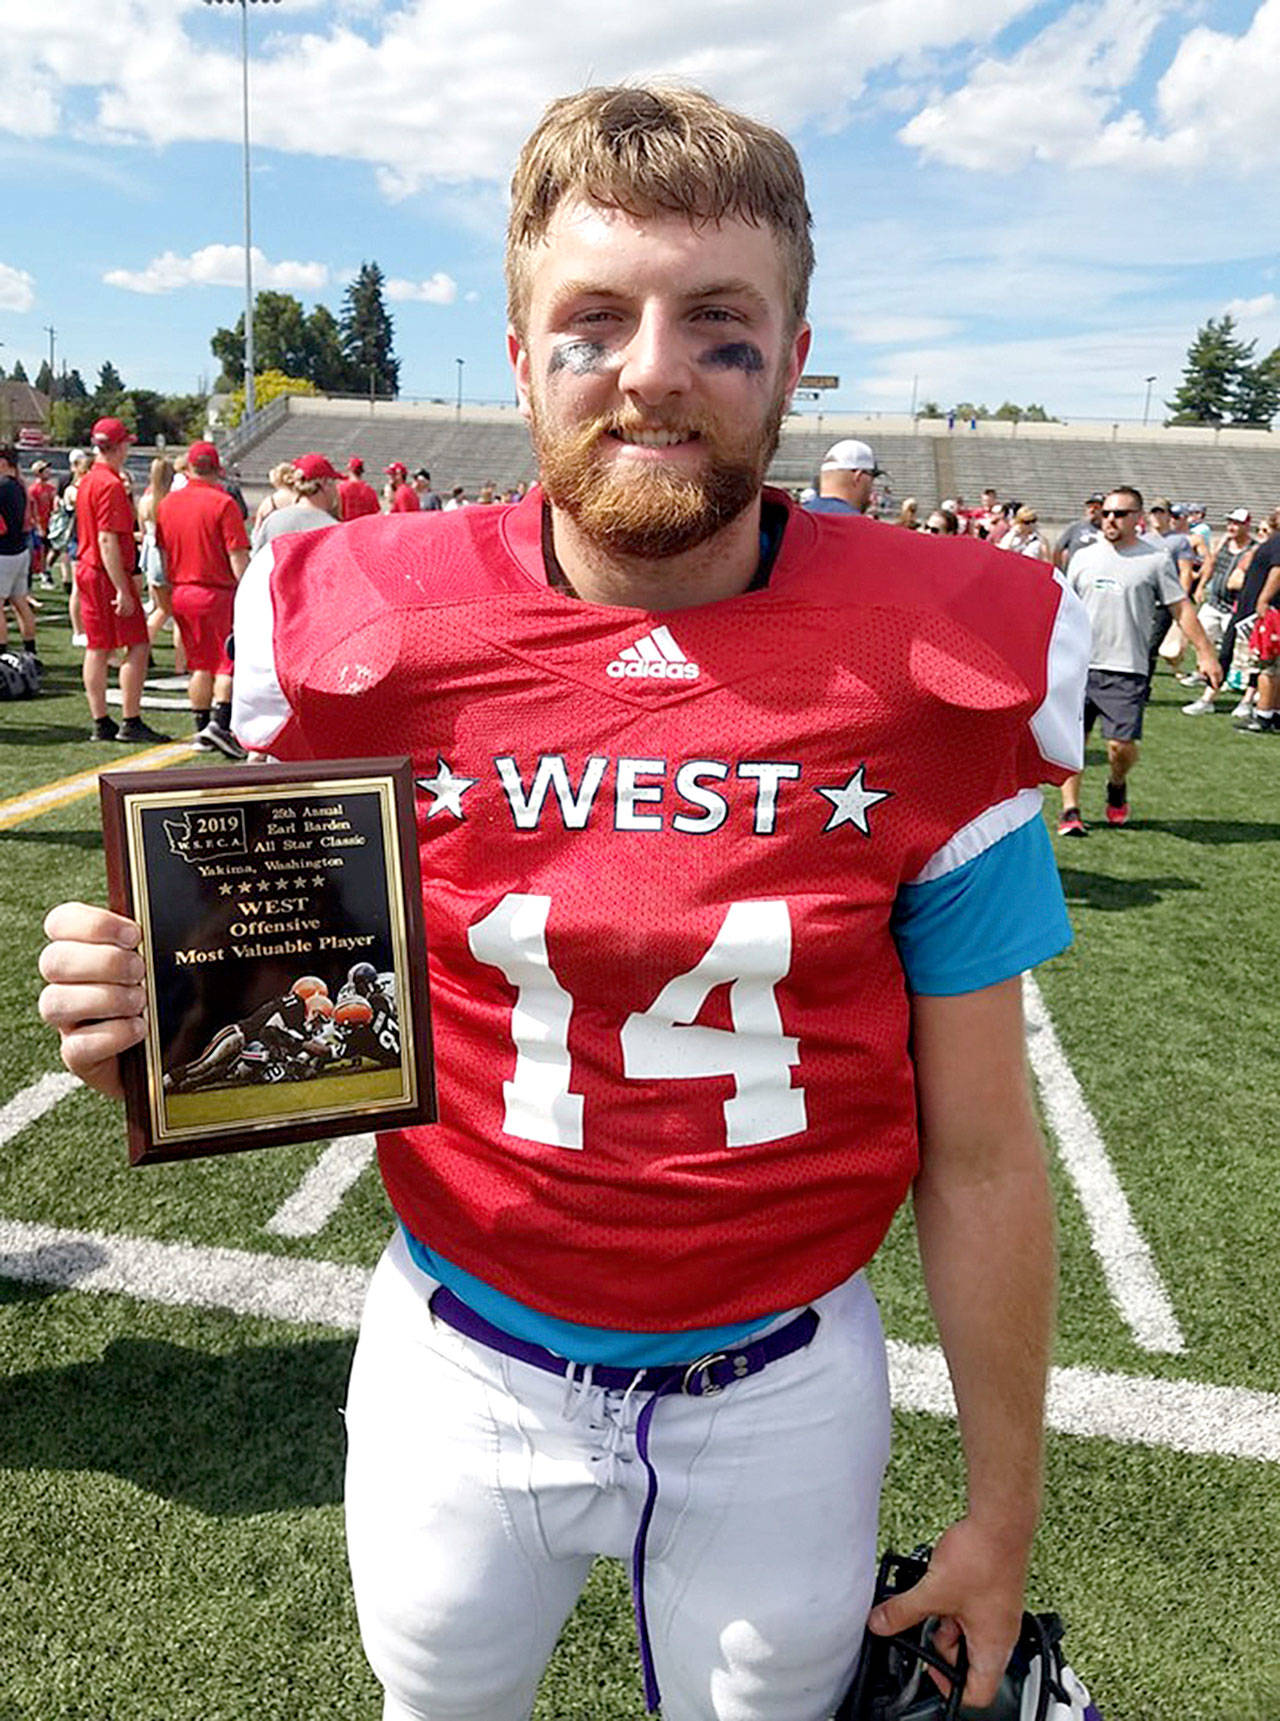 Sequim’s Riley Cowan was named the West Team’s offensive MVP in the 25th annual Earl Barden All-Star Classic on June 22. Cowan rushed for 35 yards and threw a touchdown pass for the West. Submitted photo